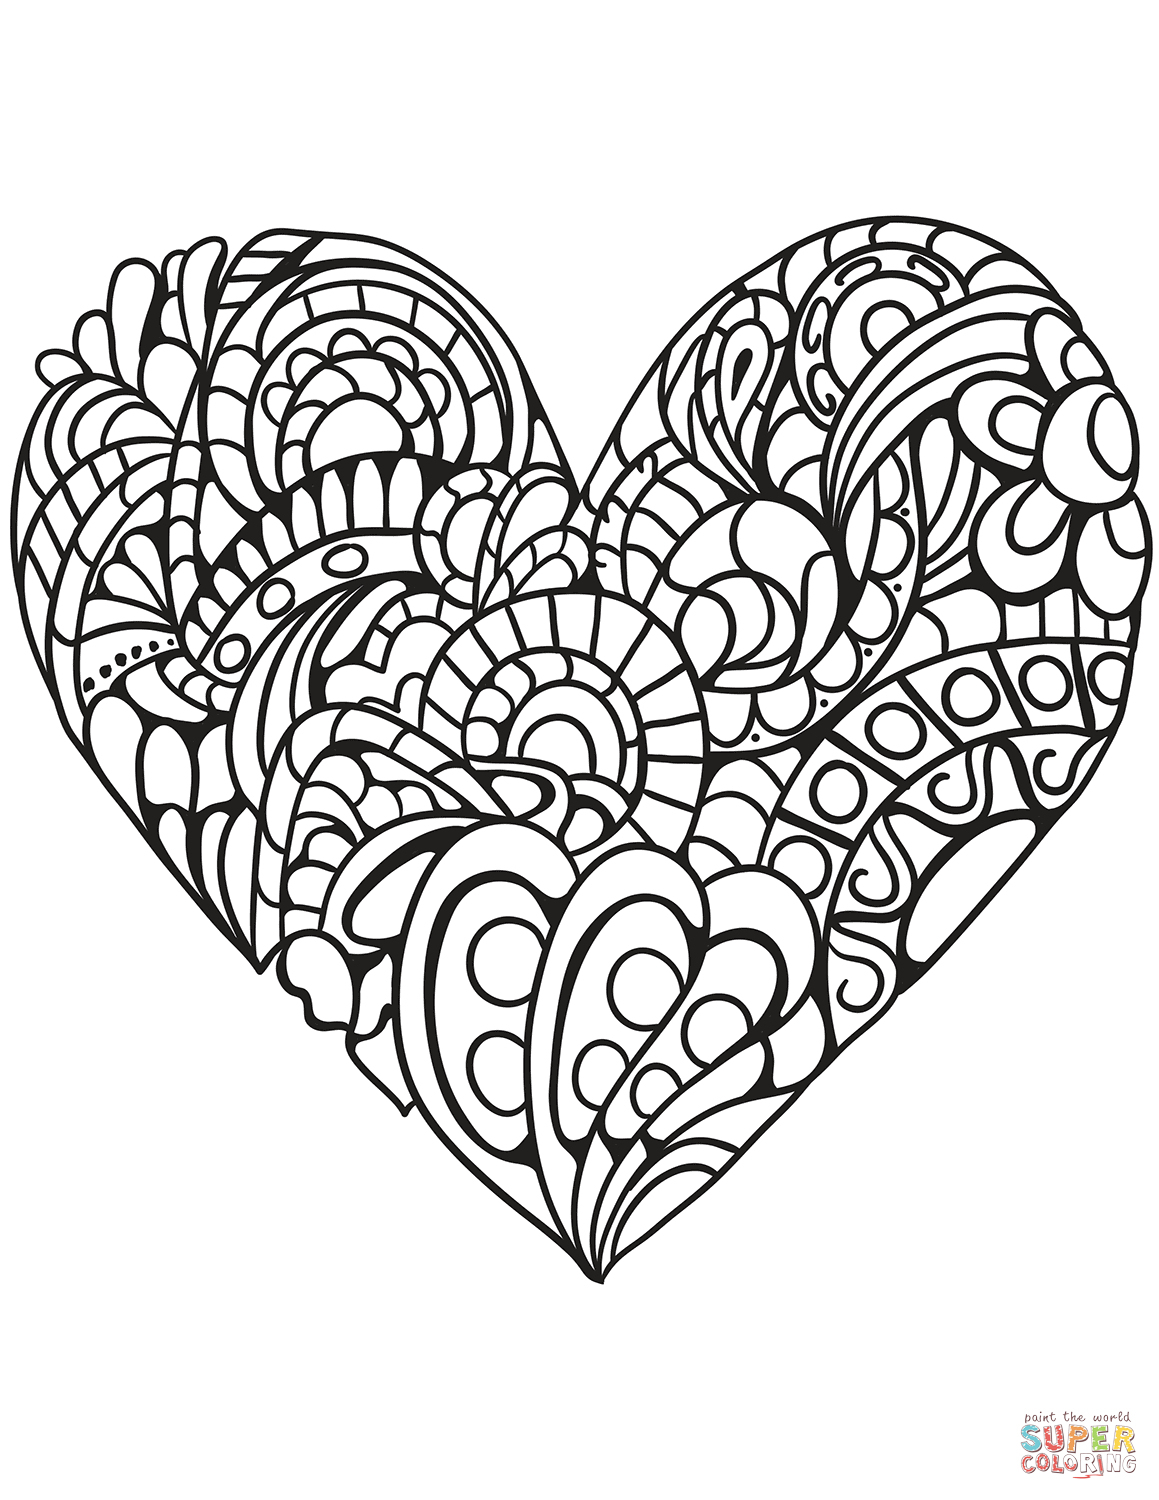 Coloring Pages : Free Printable Heartng Pages For Kidsfree - Free Printable Heart Coloring Pages